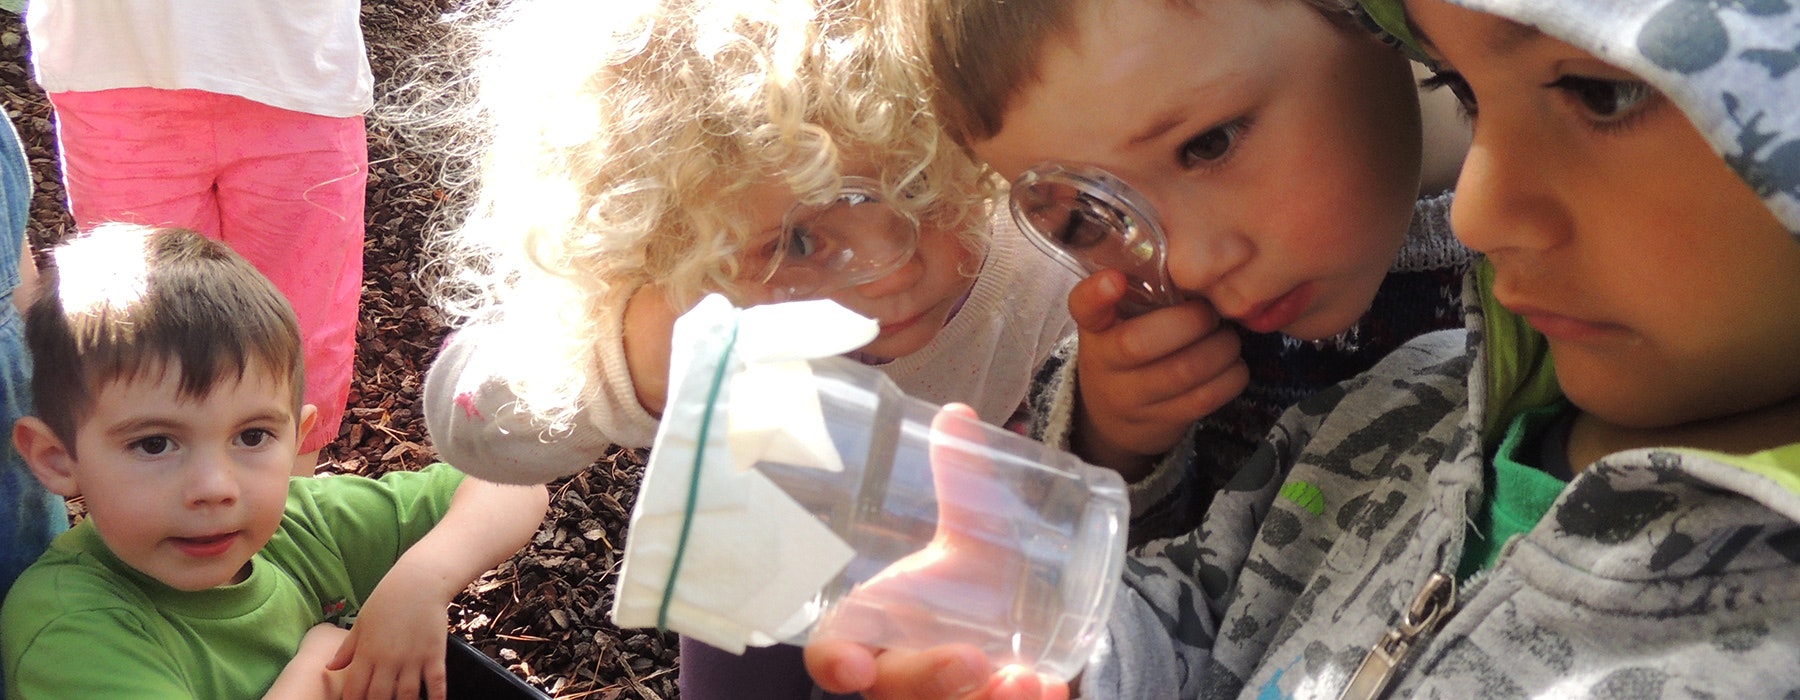 Young children using a magnifying glass to look at bugs